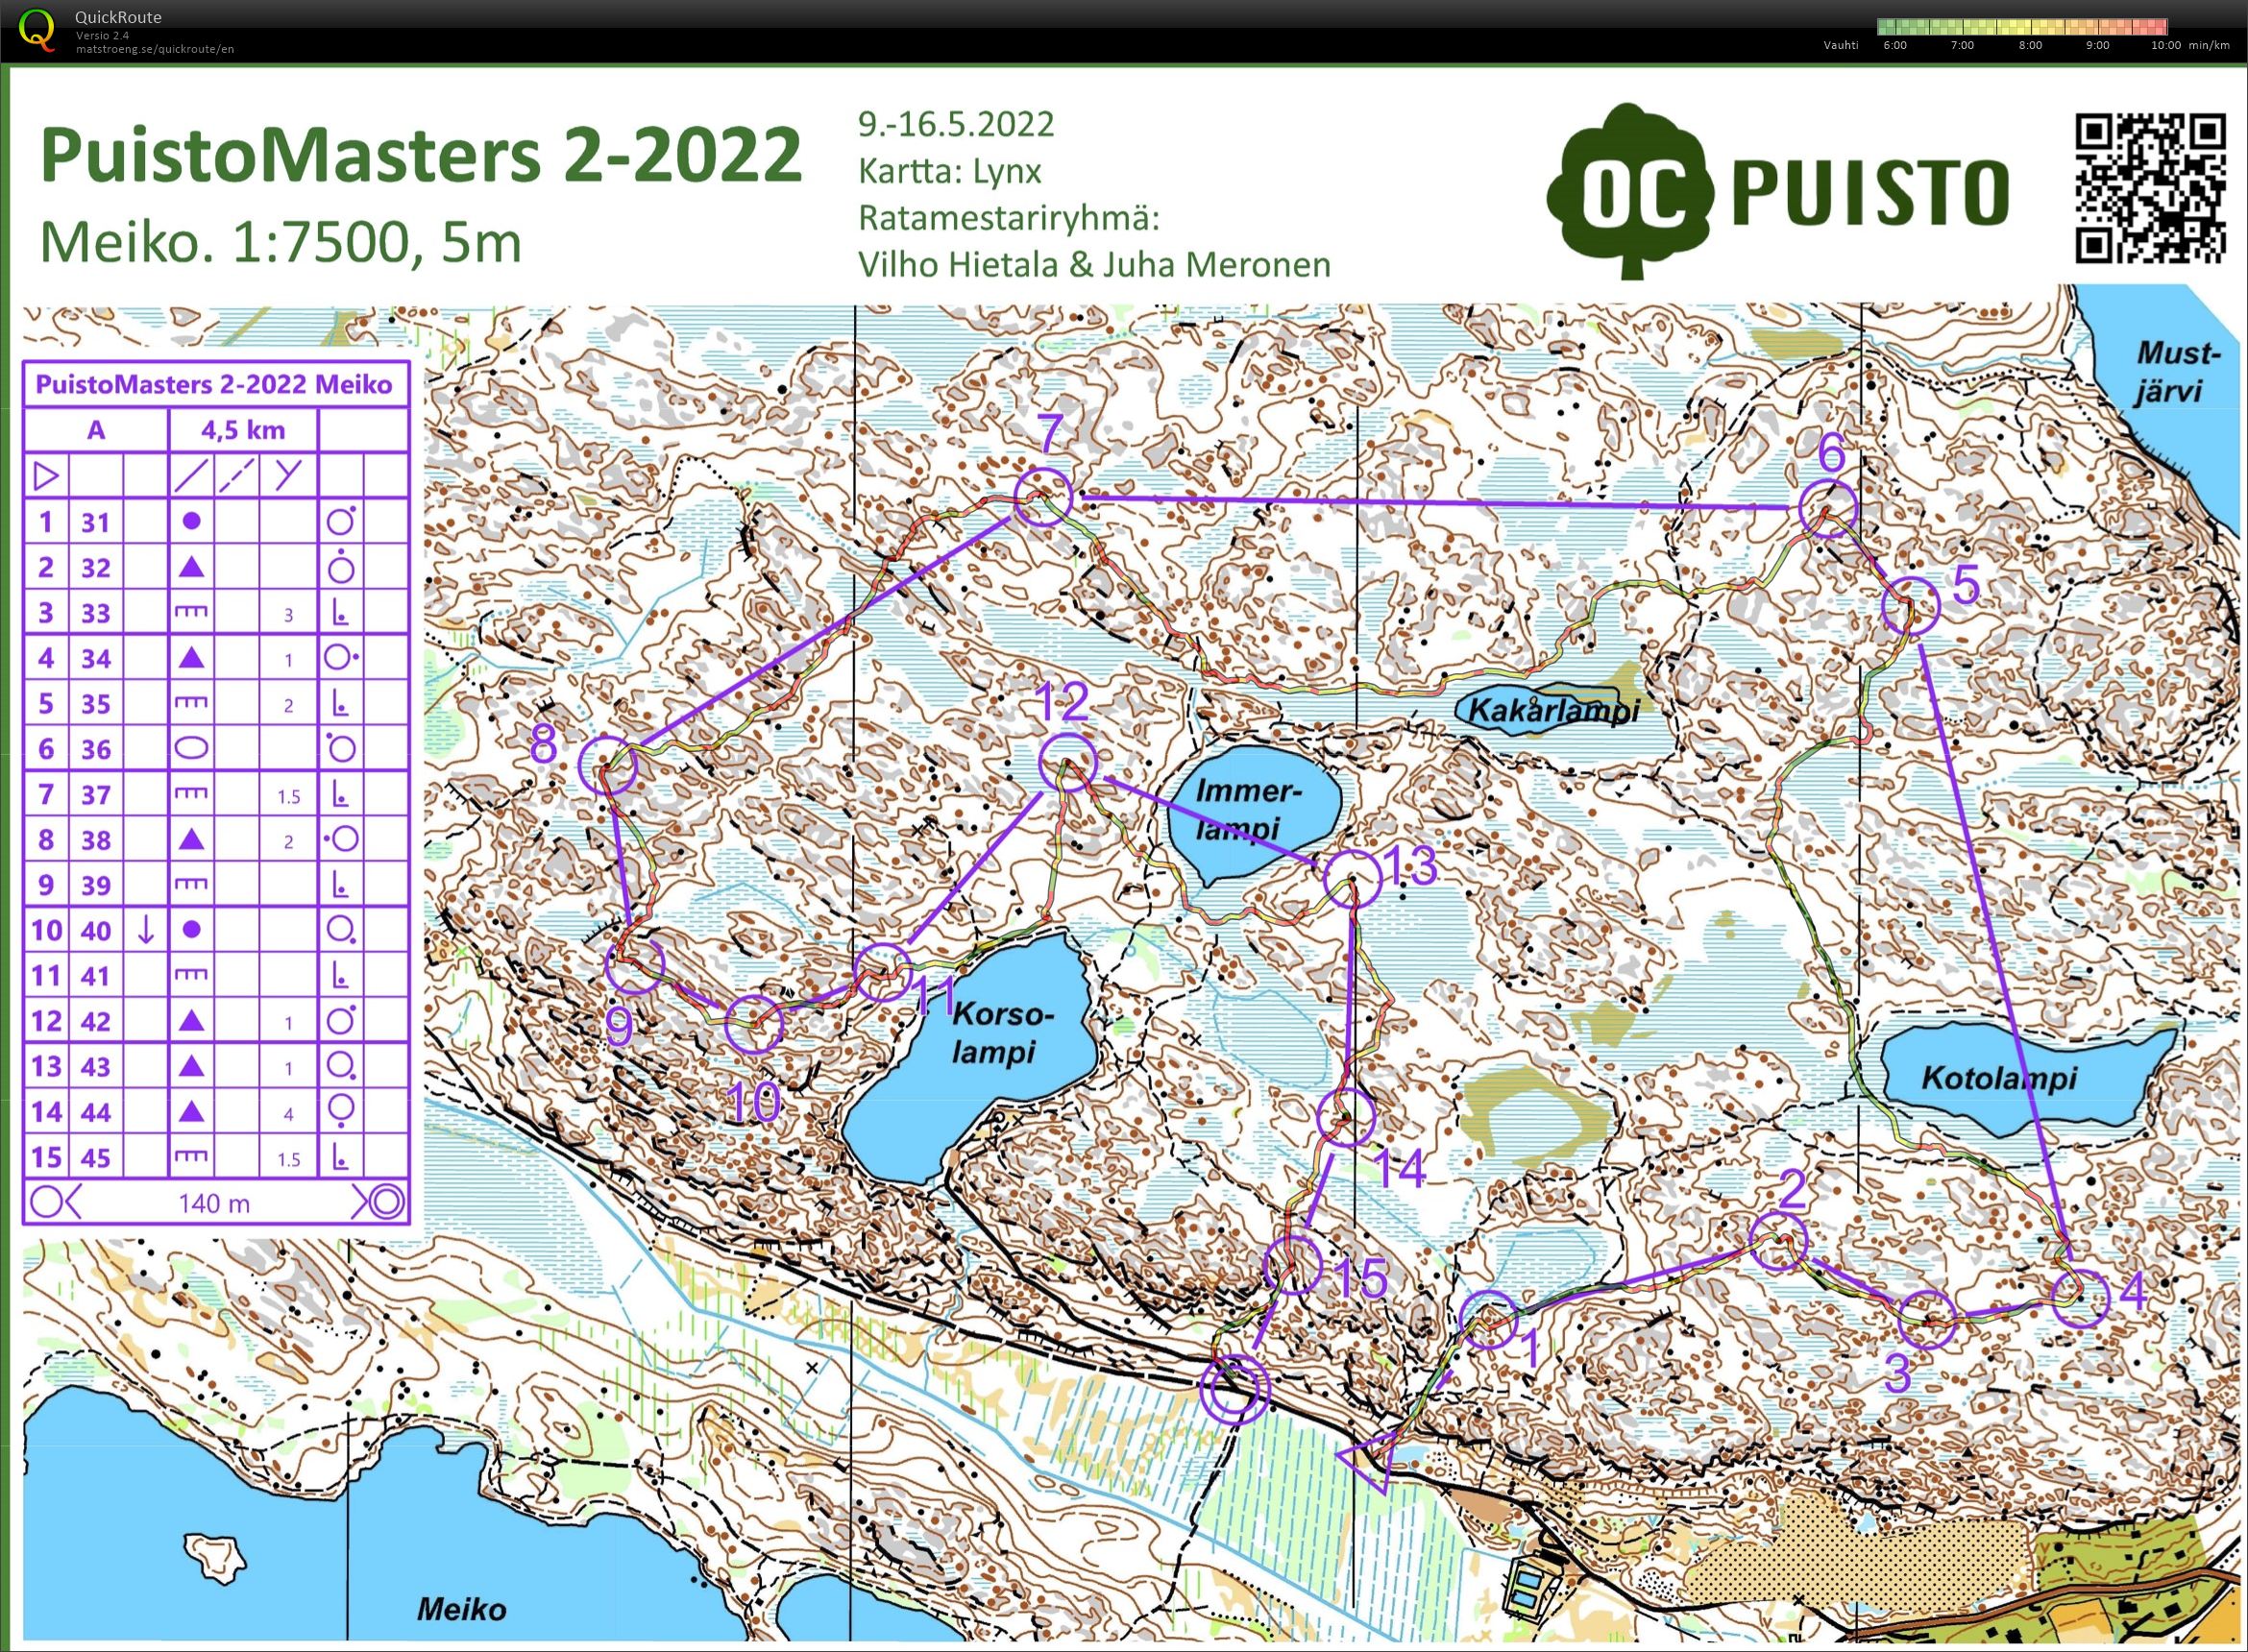 Puistomasters 2-2022 (14.05.2022)